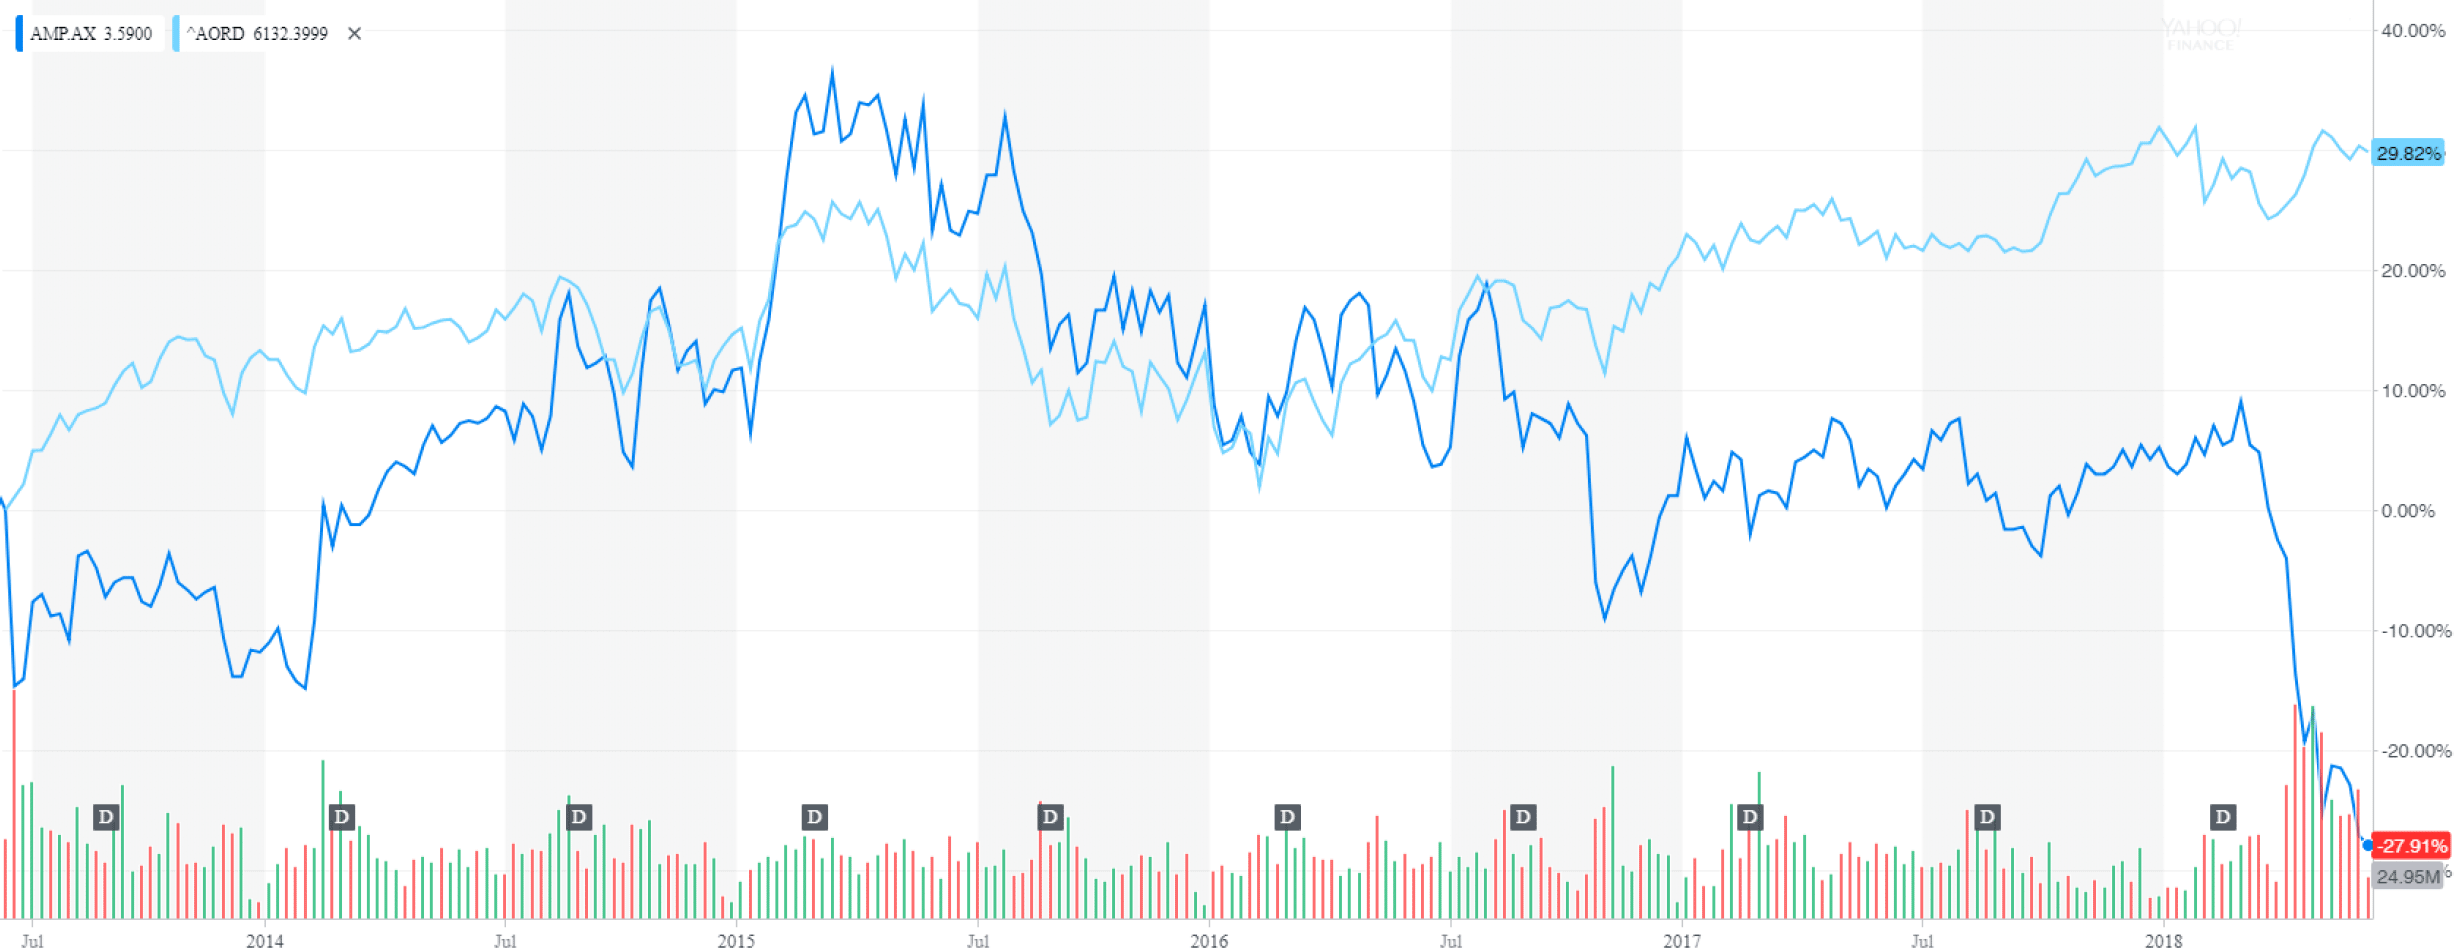 AMP’s share price movement compared to the All Ordinaries Index over the last 5 years